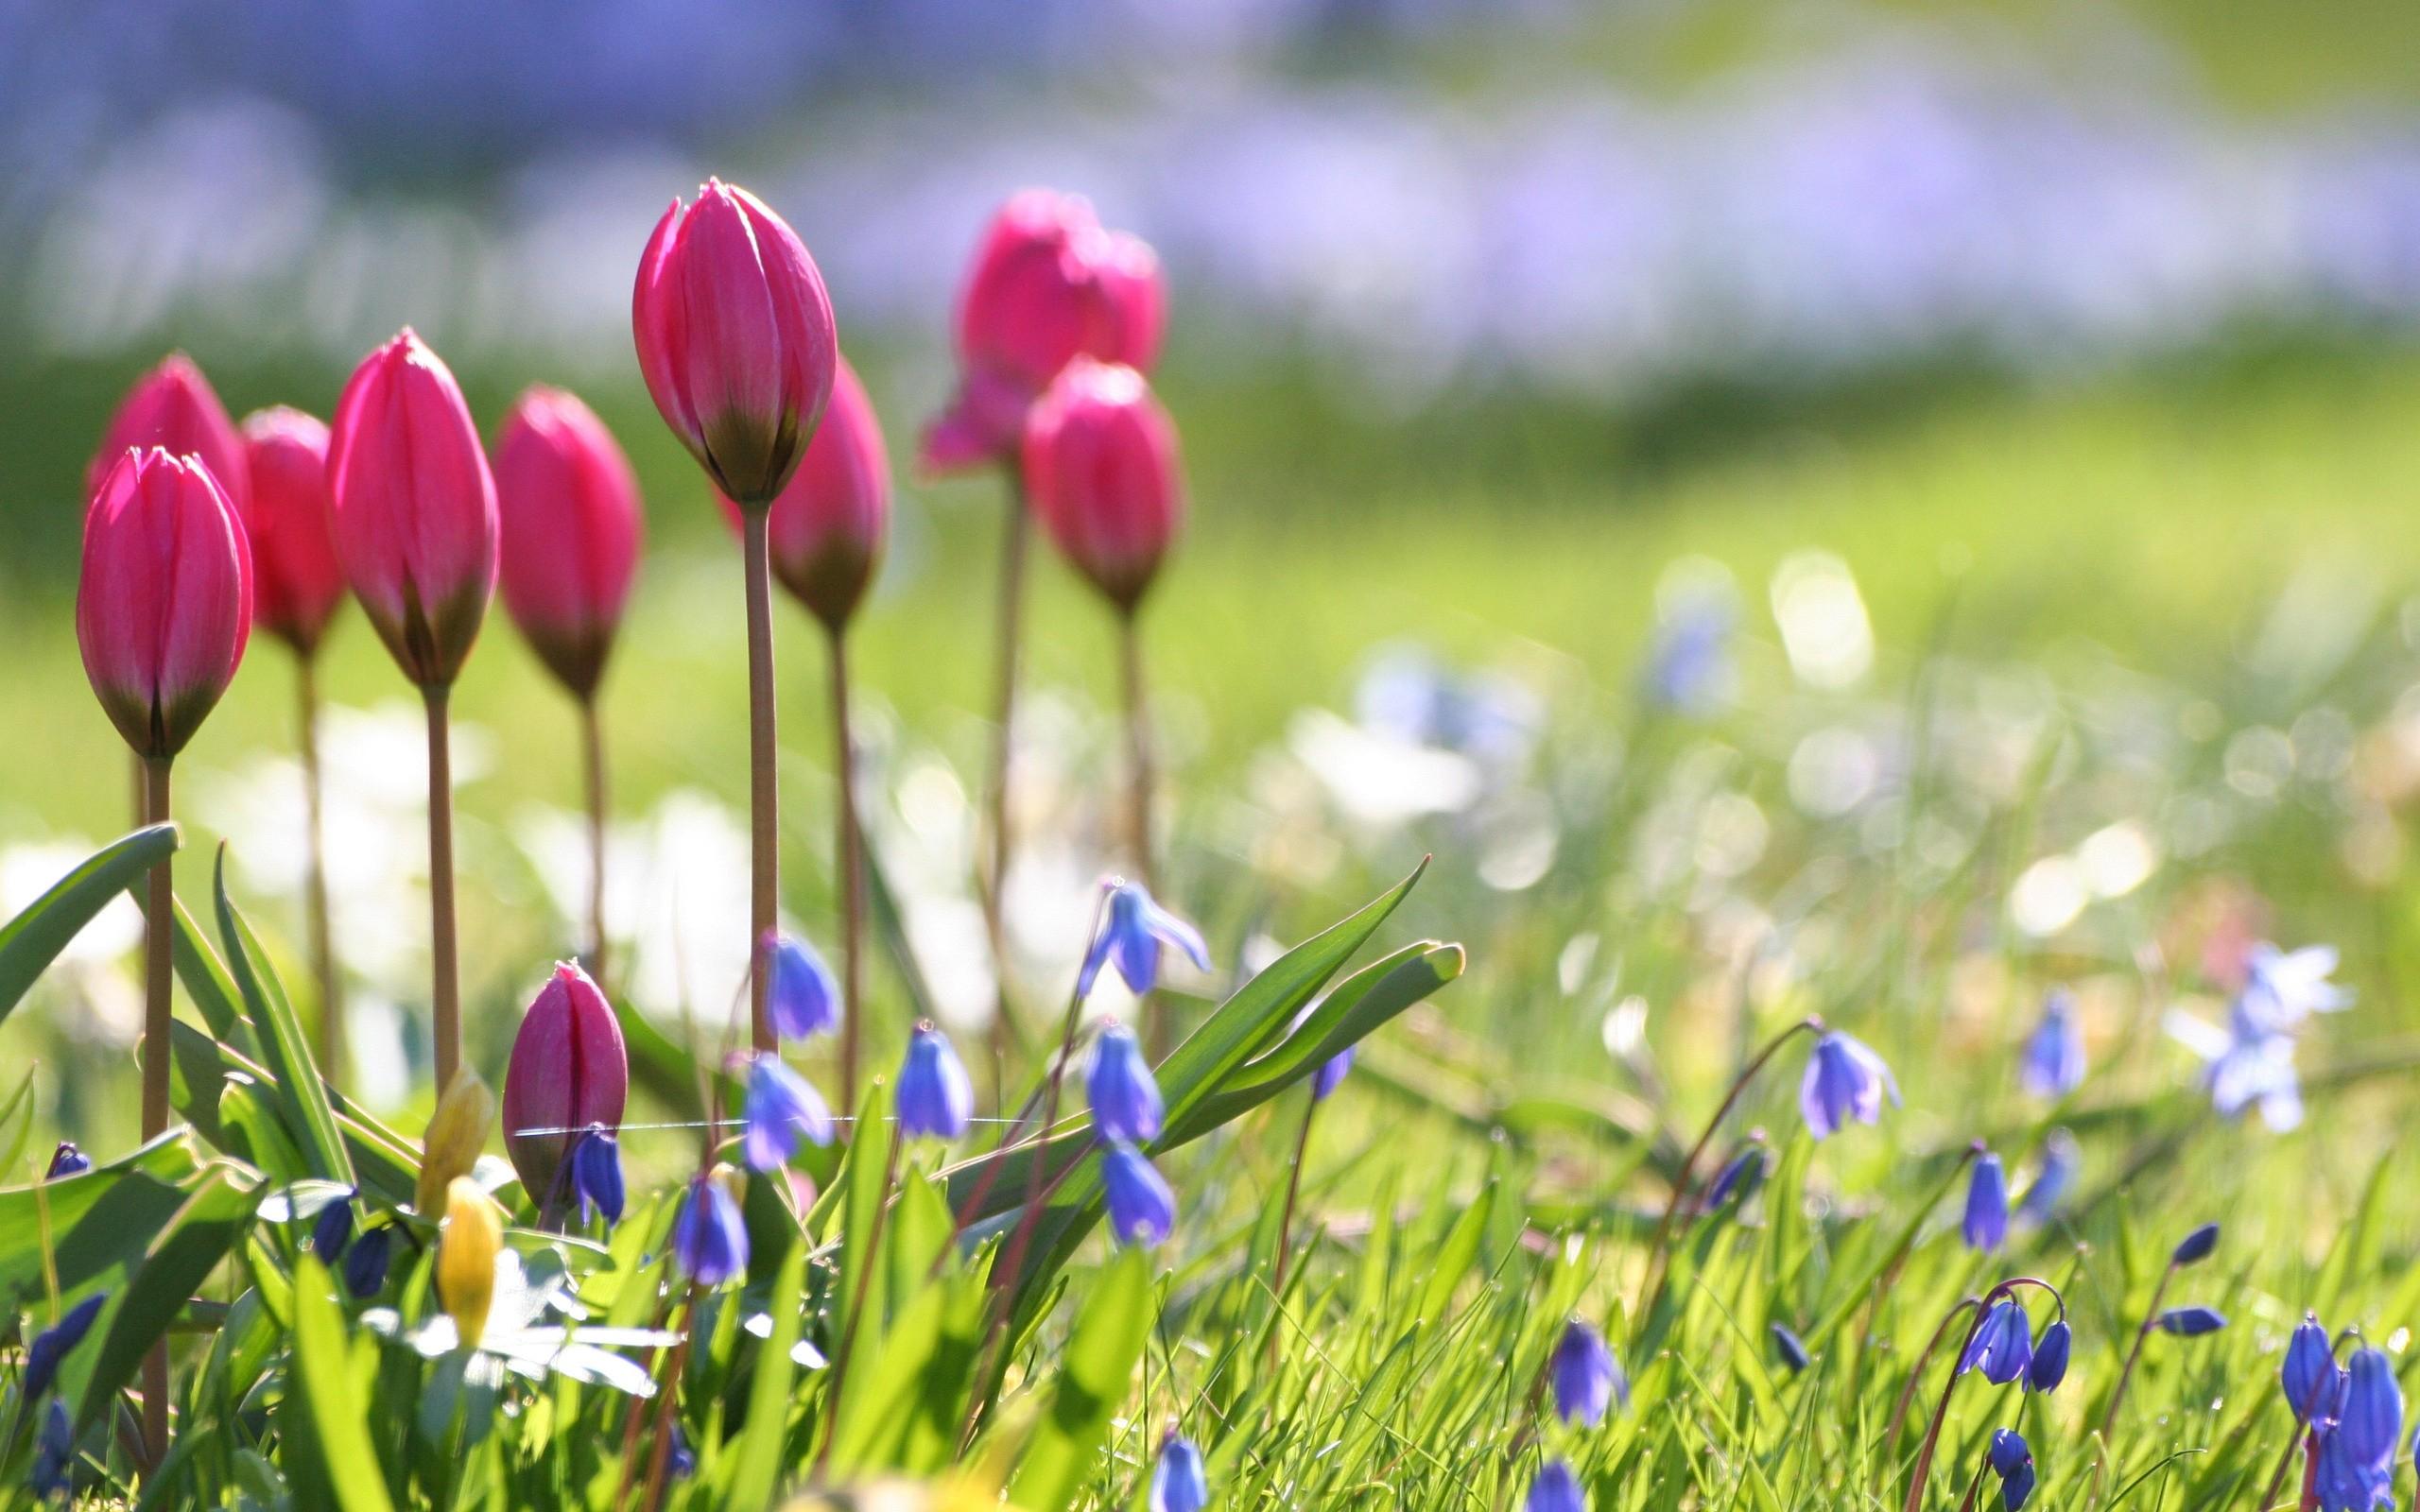 Spring Flowers Wallpaper HD (Images)